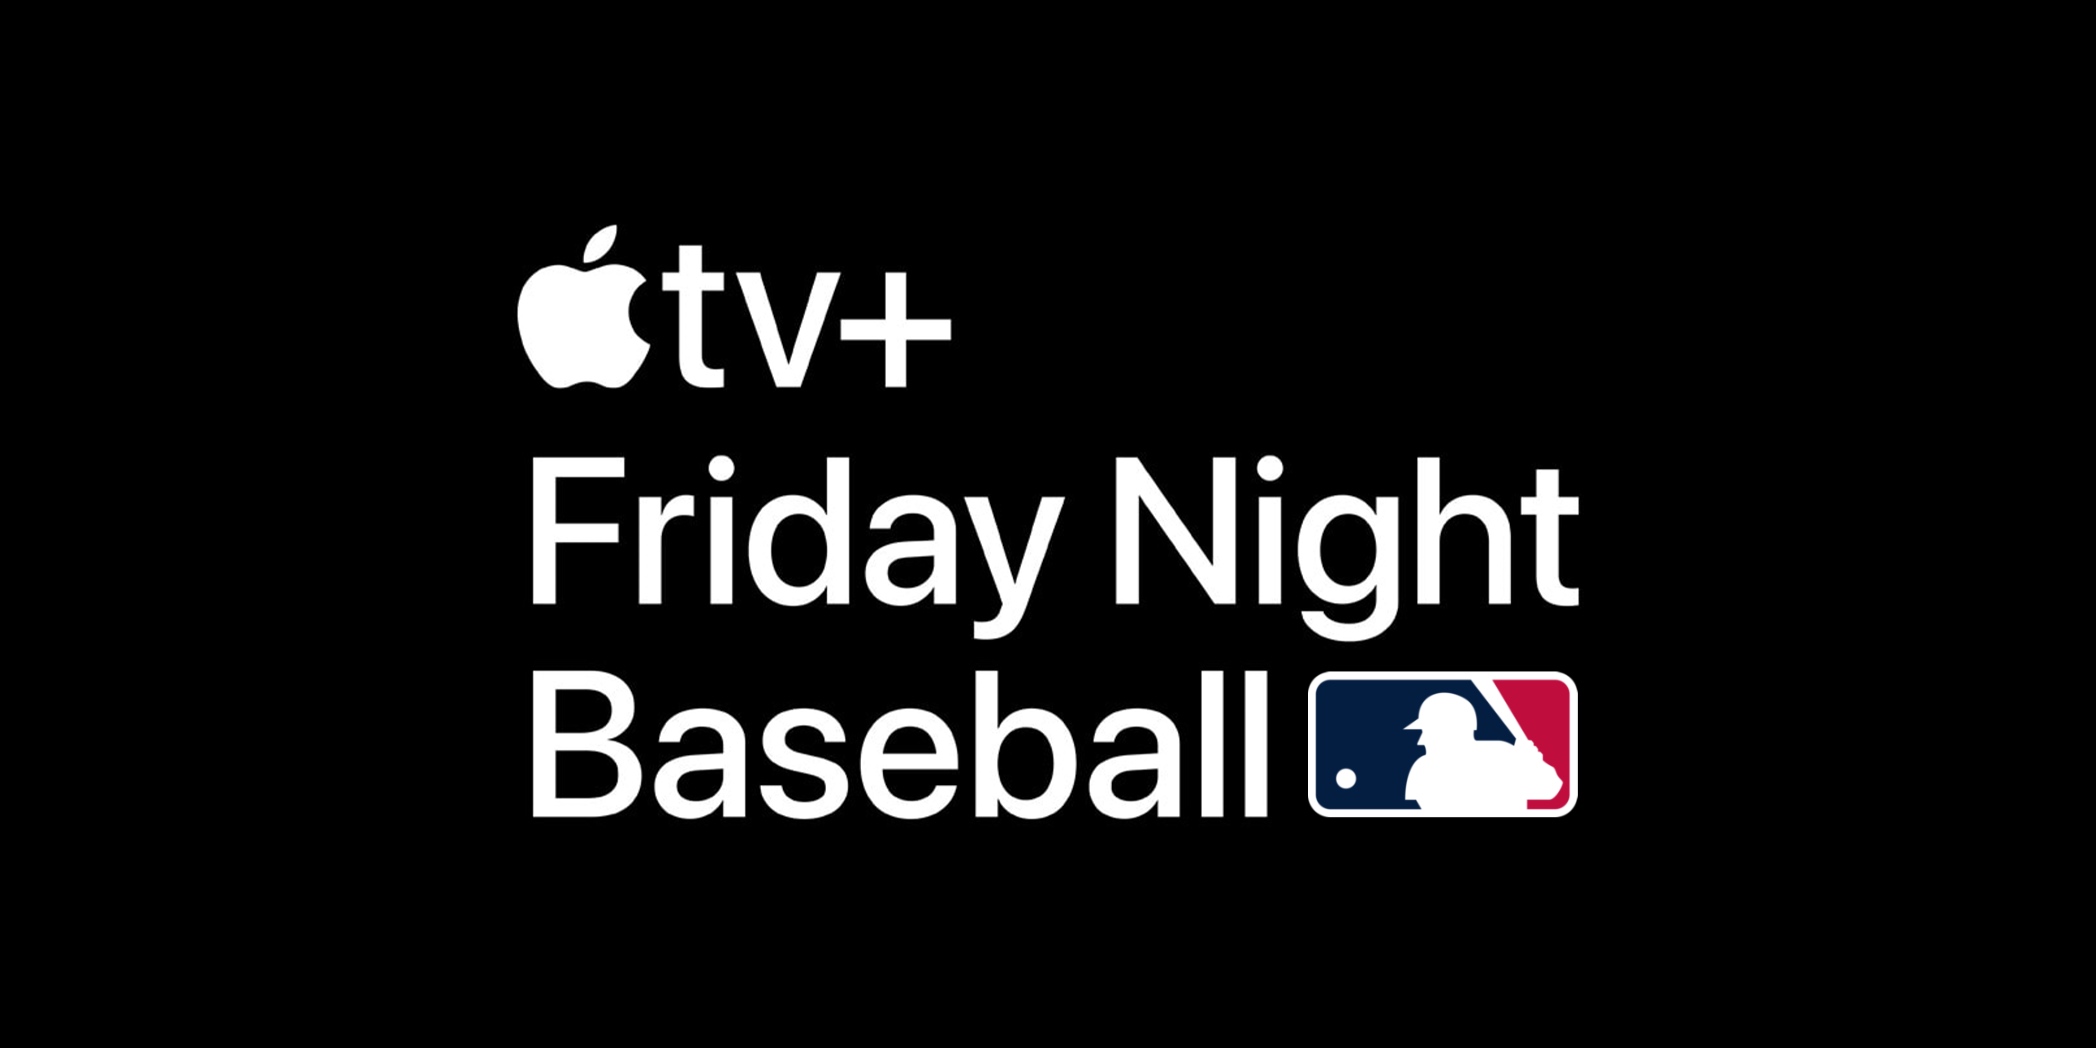 apple tv and mlb network